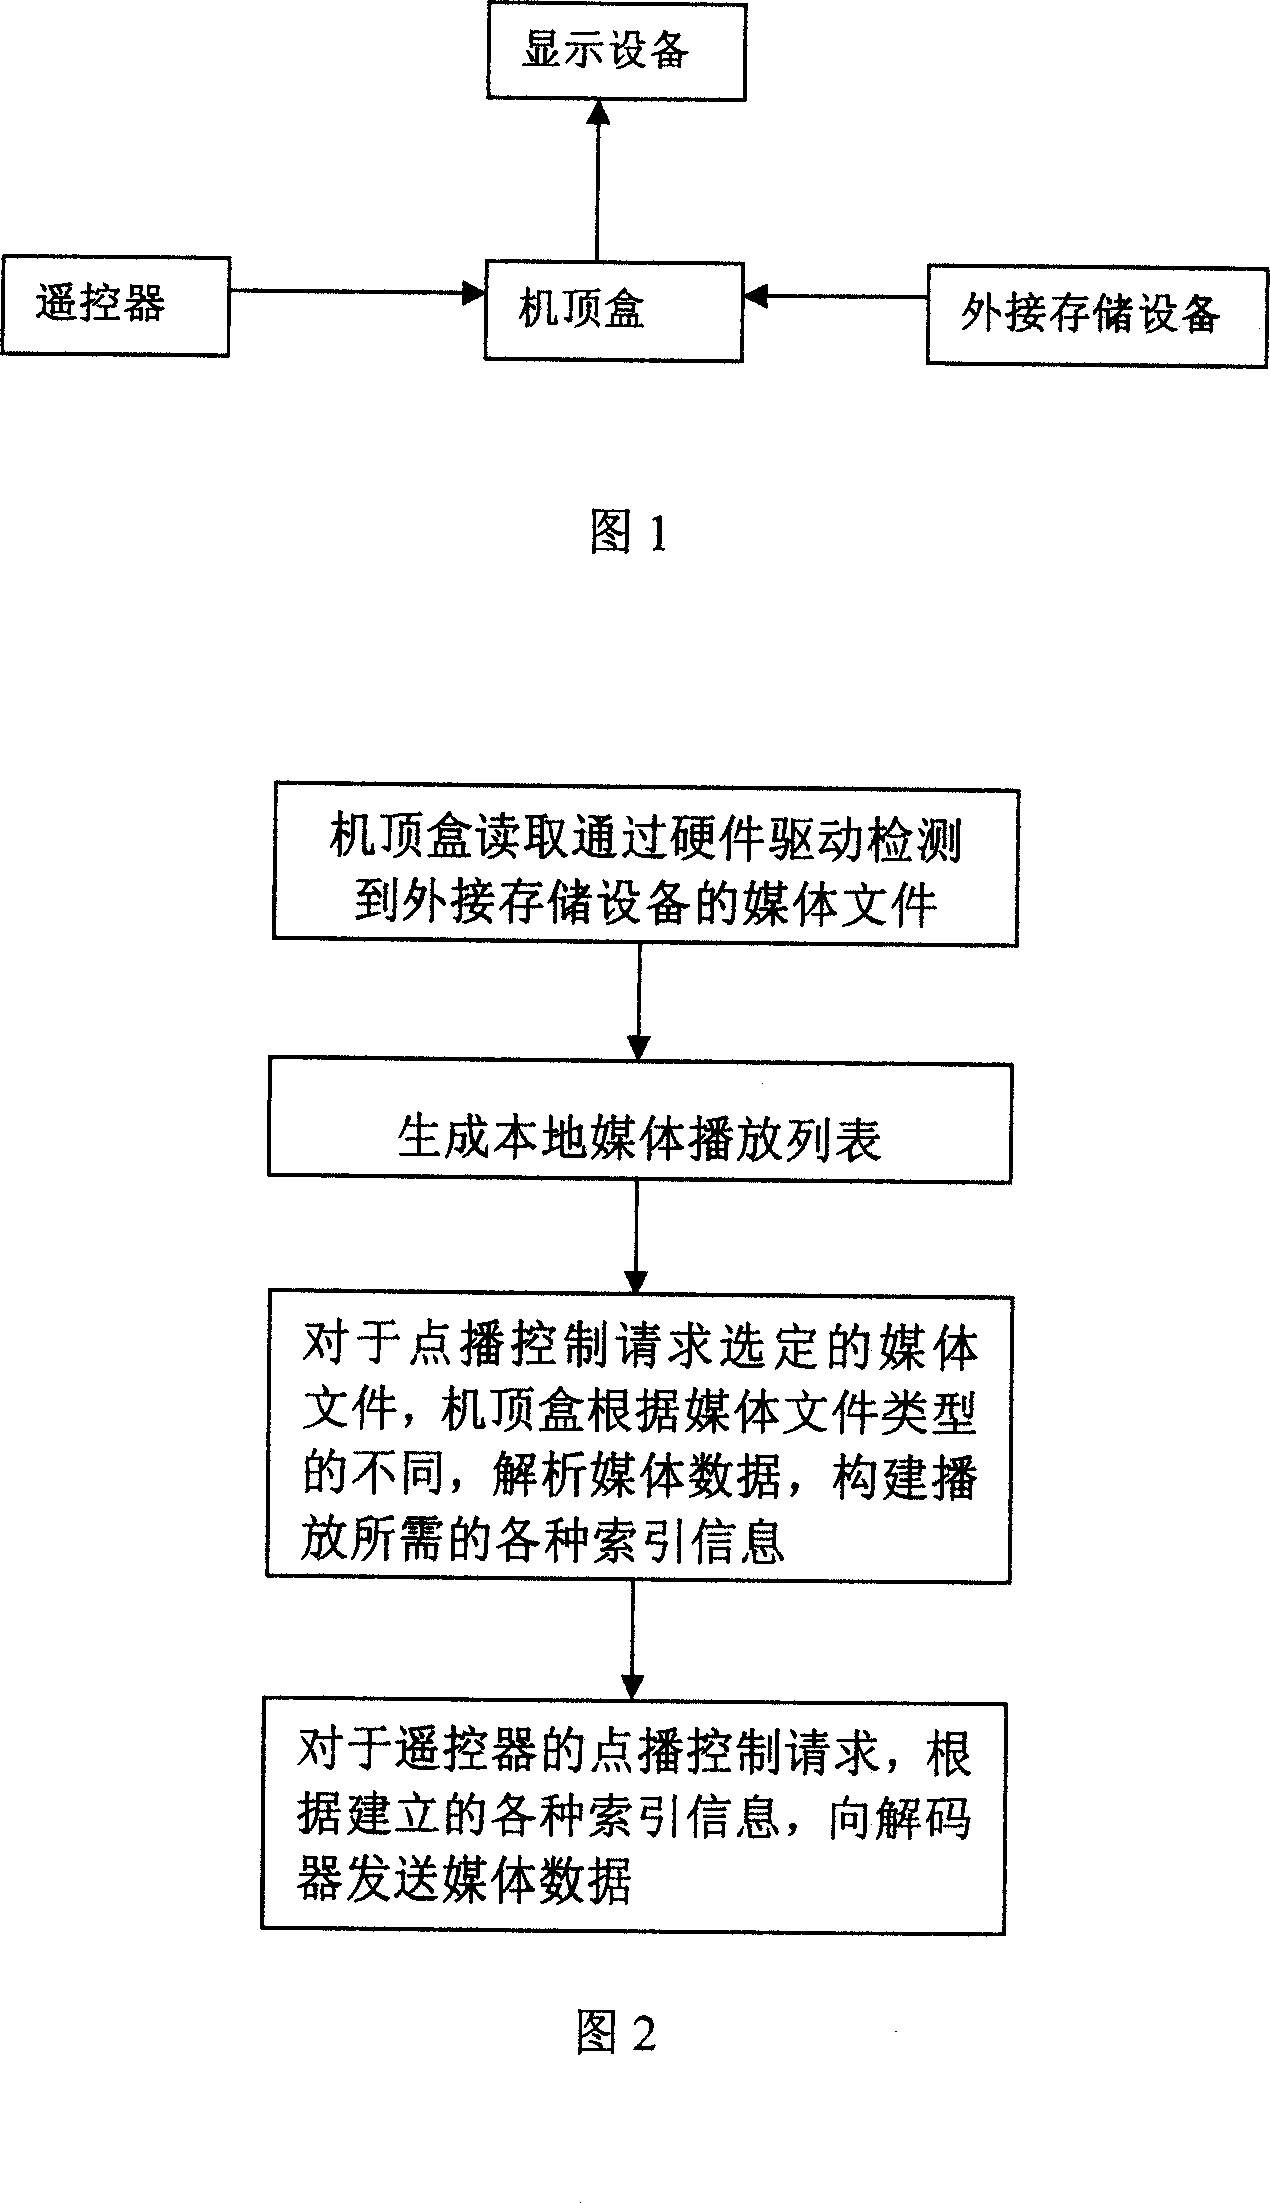 Method for playing media files in external storage device via STB